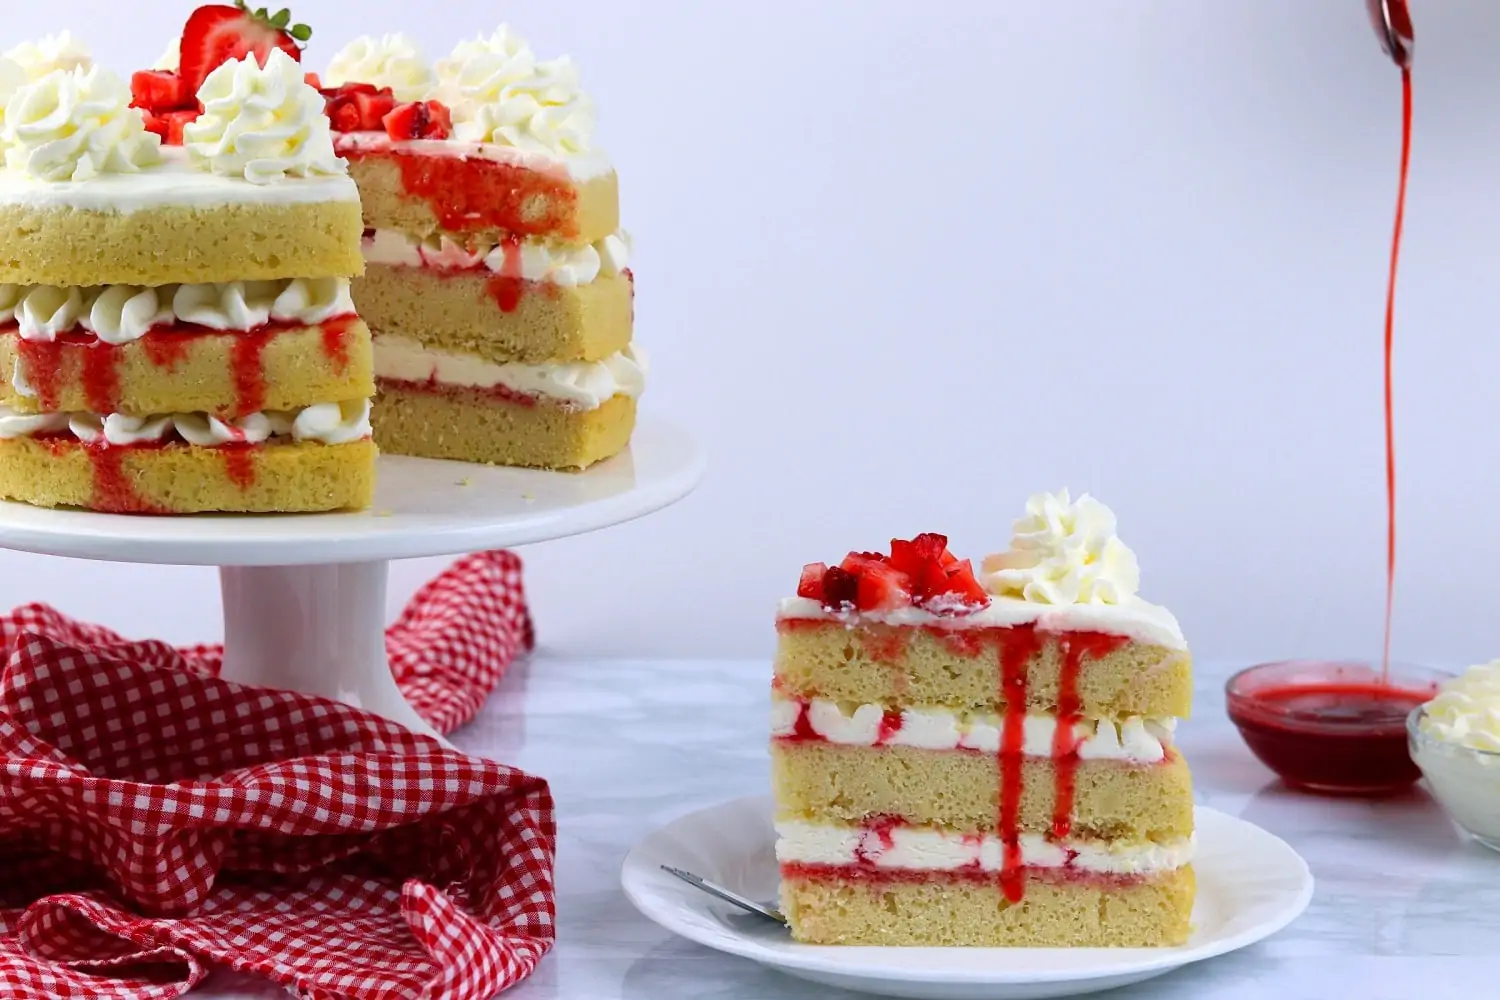 Vanilla Cake with Strawberry Filling